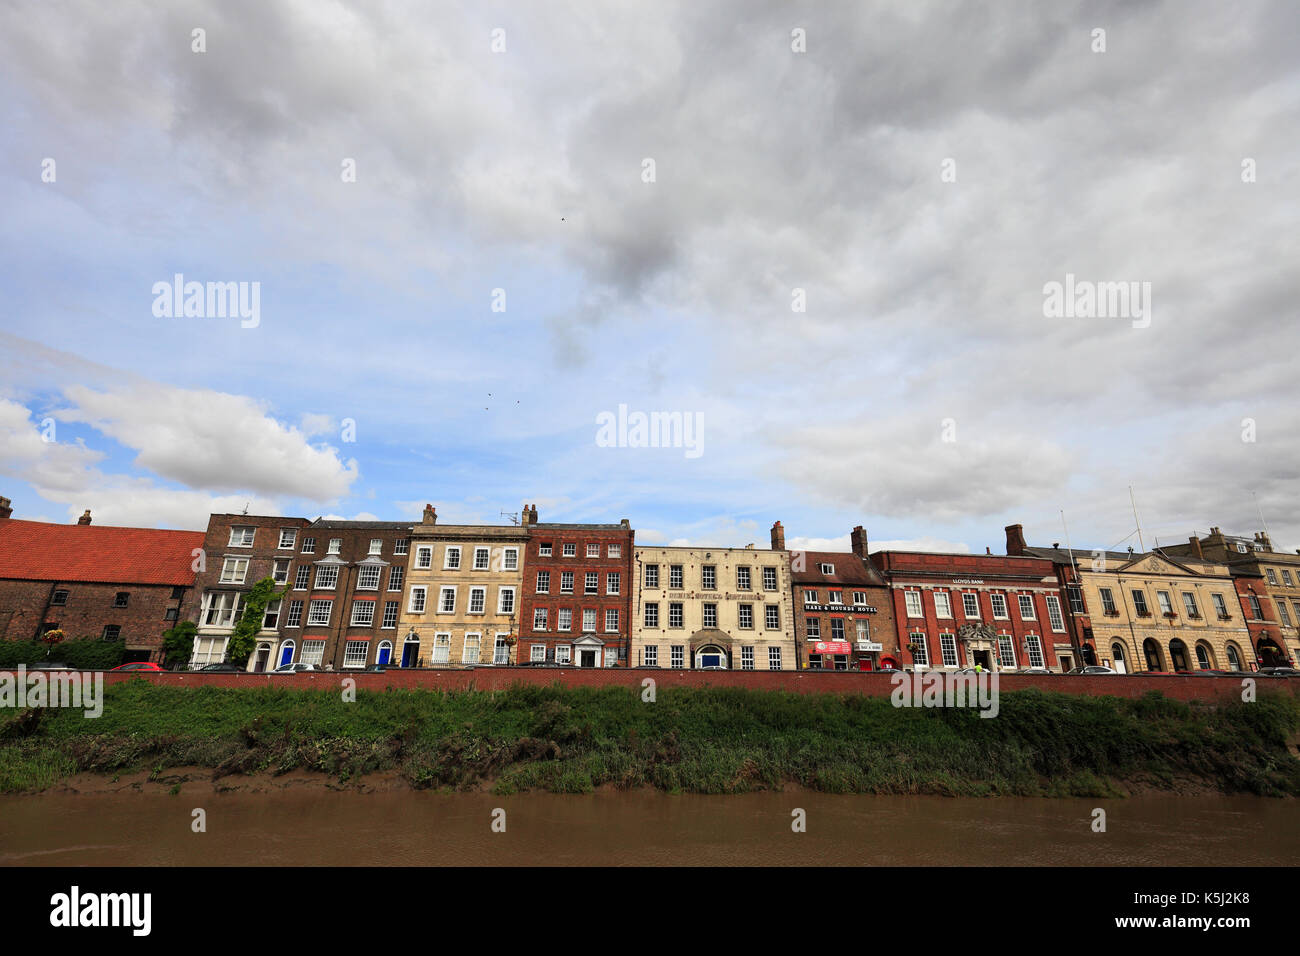 North Brink along the River Nene in the centre of Wisbech, Cambridgeshire, England, UK. Stock Photo